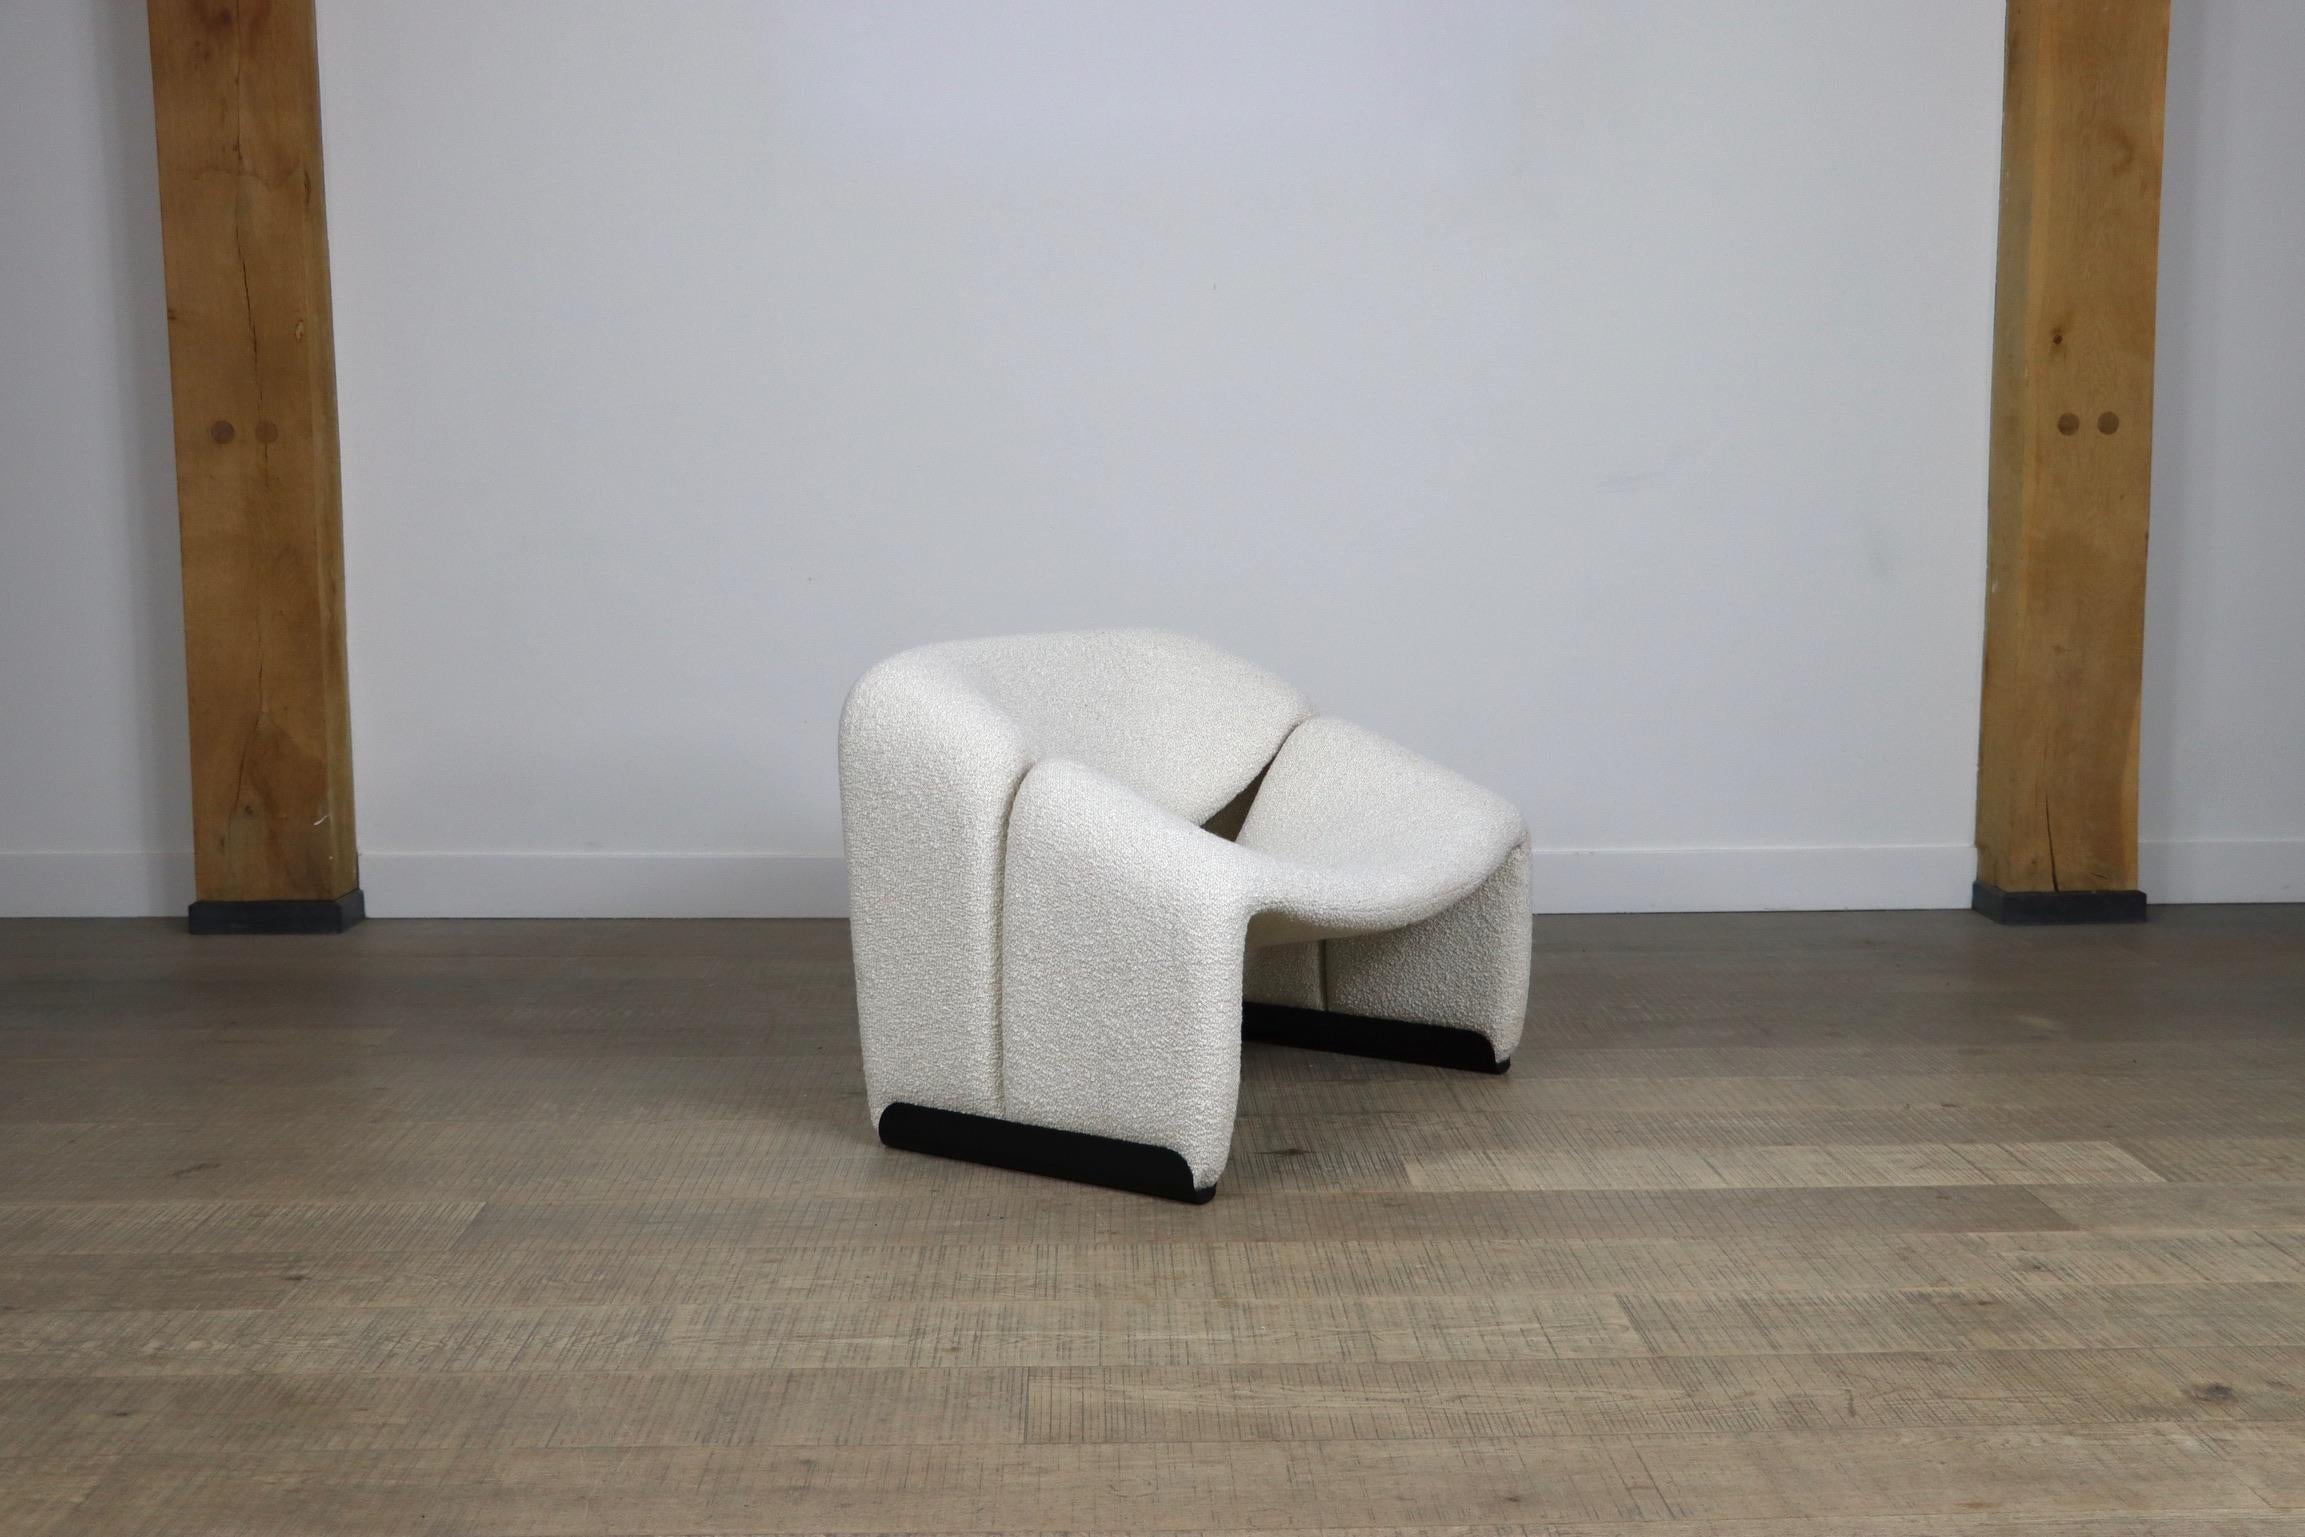 Designed by Pierre Paulin in 1973. The model F598 of Artifort, also known as the 'Groovy' or 'M chair' following its characteristic shape. This chair has been reupholstered in beautiful high quality bouclé, which has a soft cream color. These